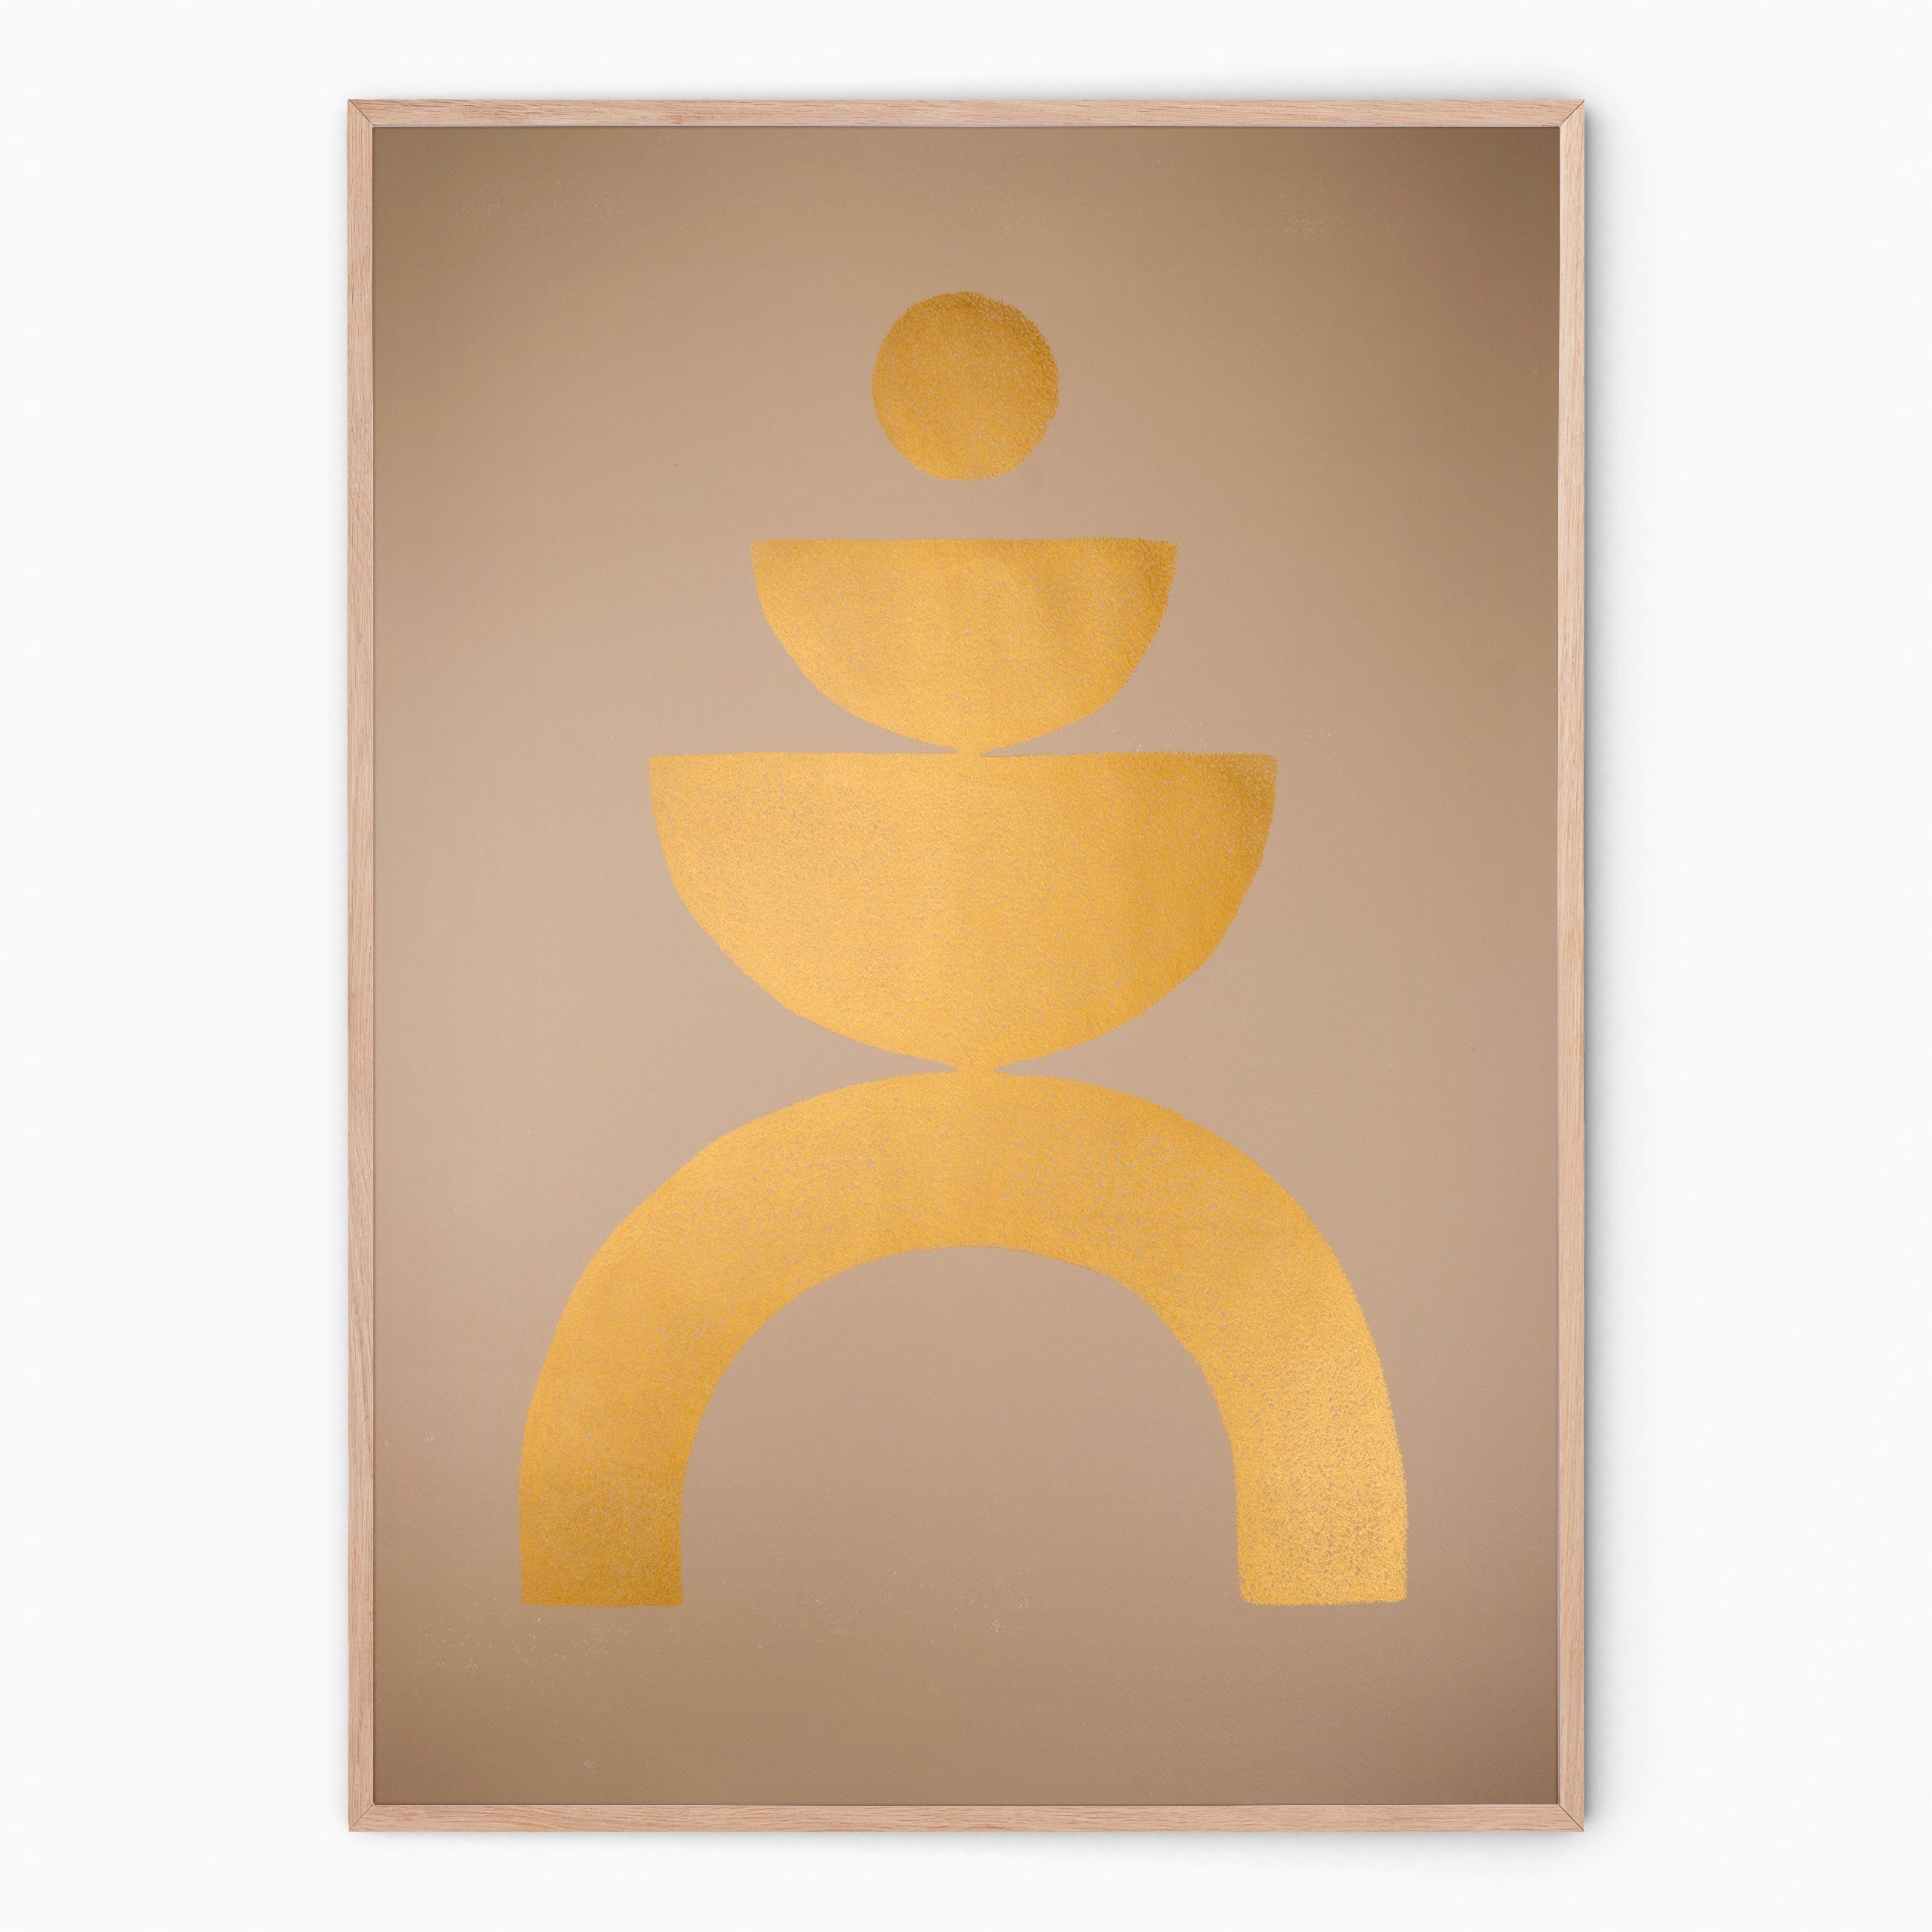 Buy large abstract art against gold and warm grey background I Handmade poster Enkel Art Studio